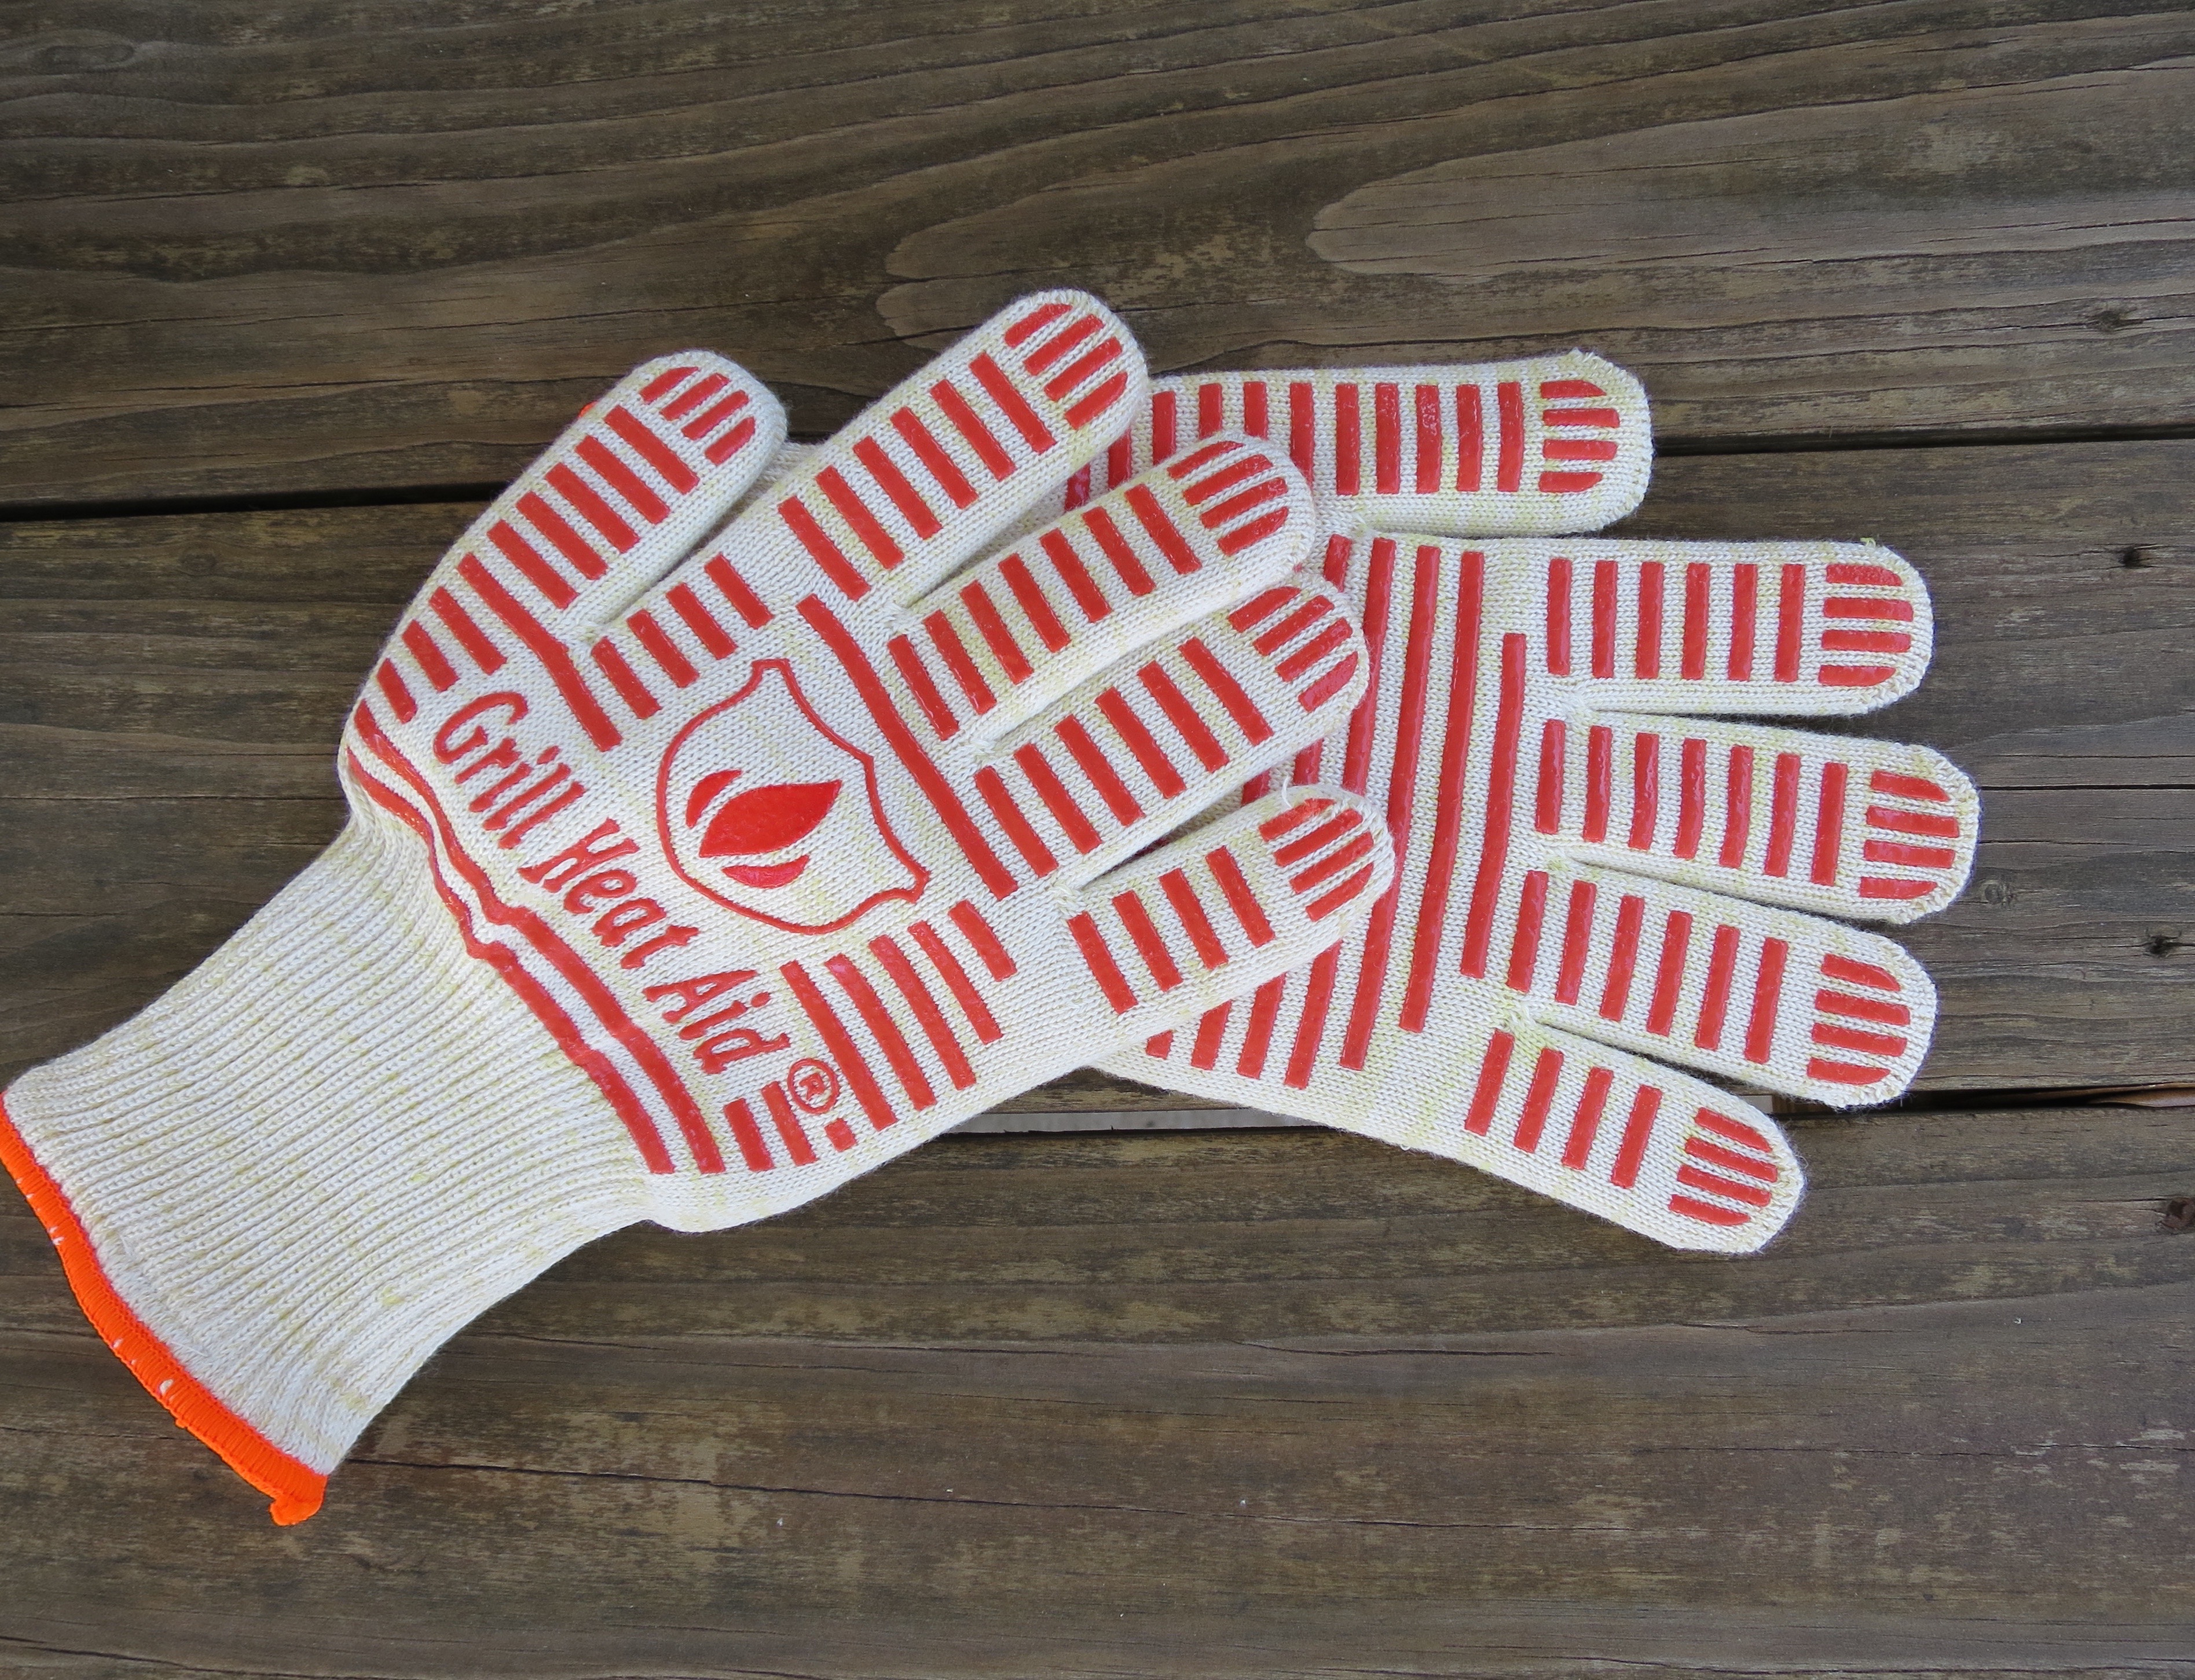 Texas Oven Co. Oven Gloves for Wood-fired Ovens? - Texas Oven Co.